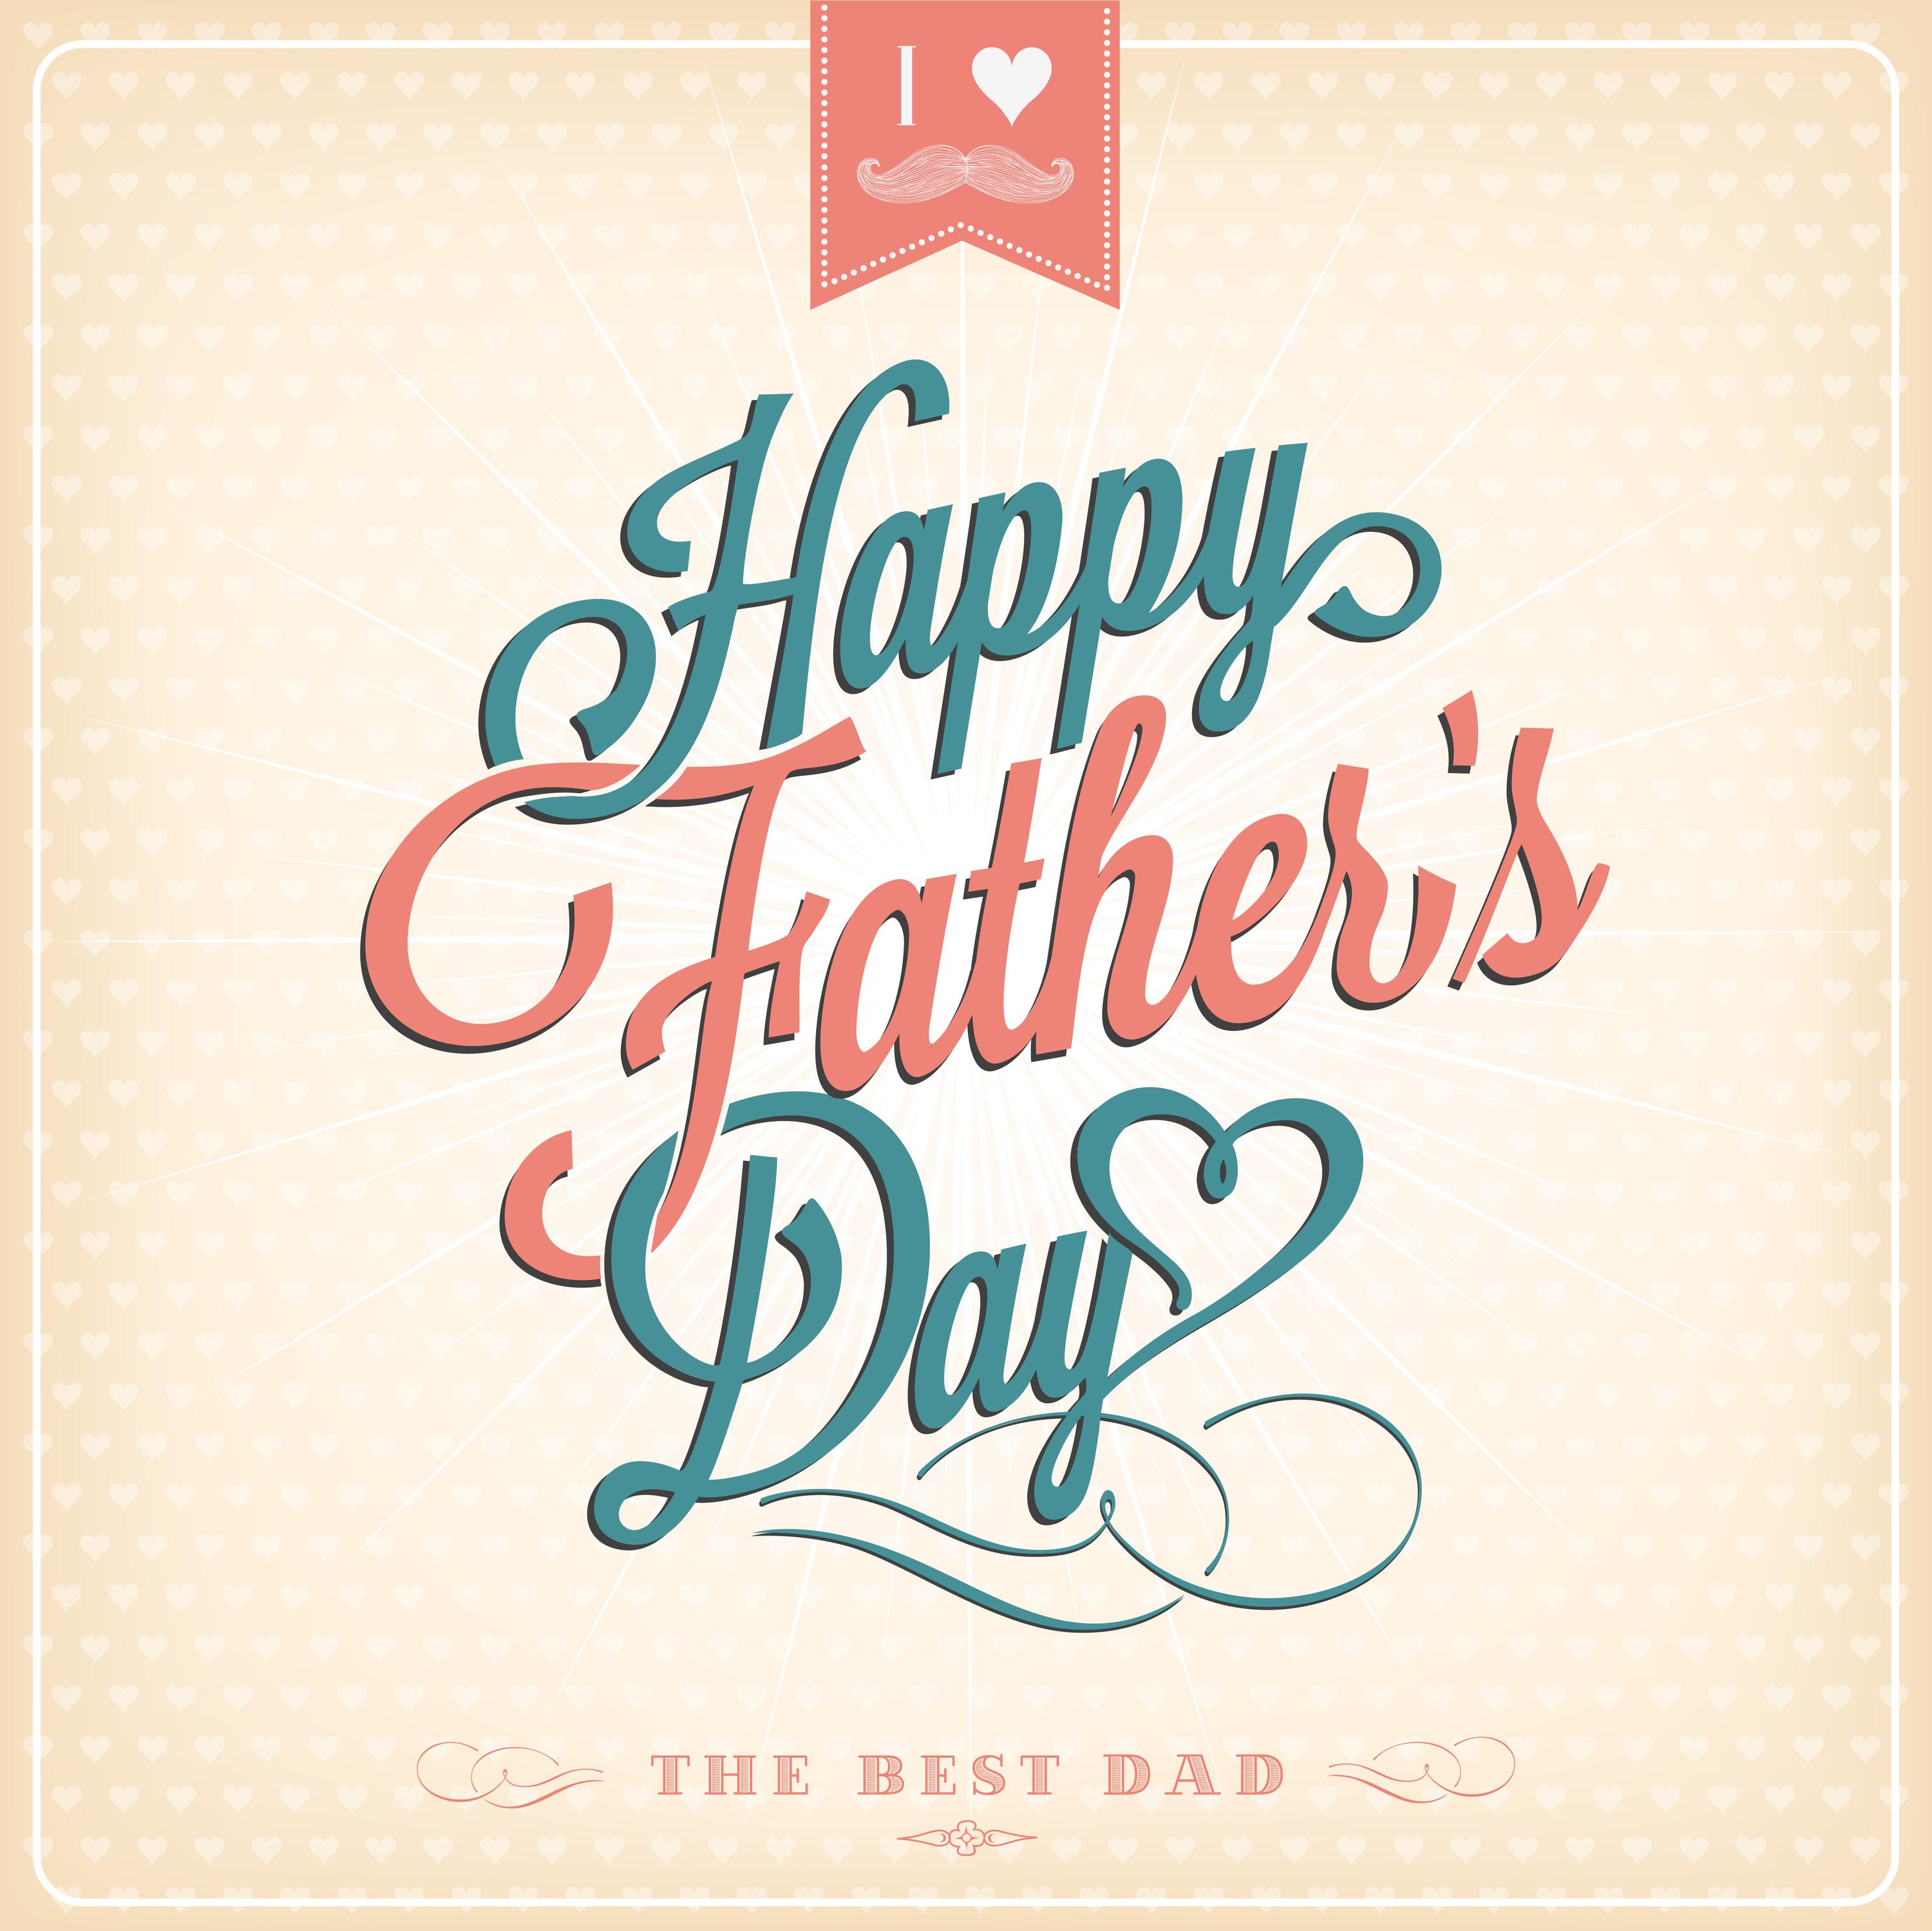 Happy Fathers Day Inspirational Quotes With Best Wishes